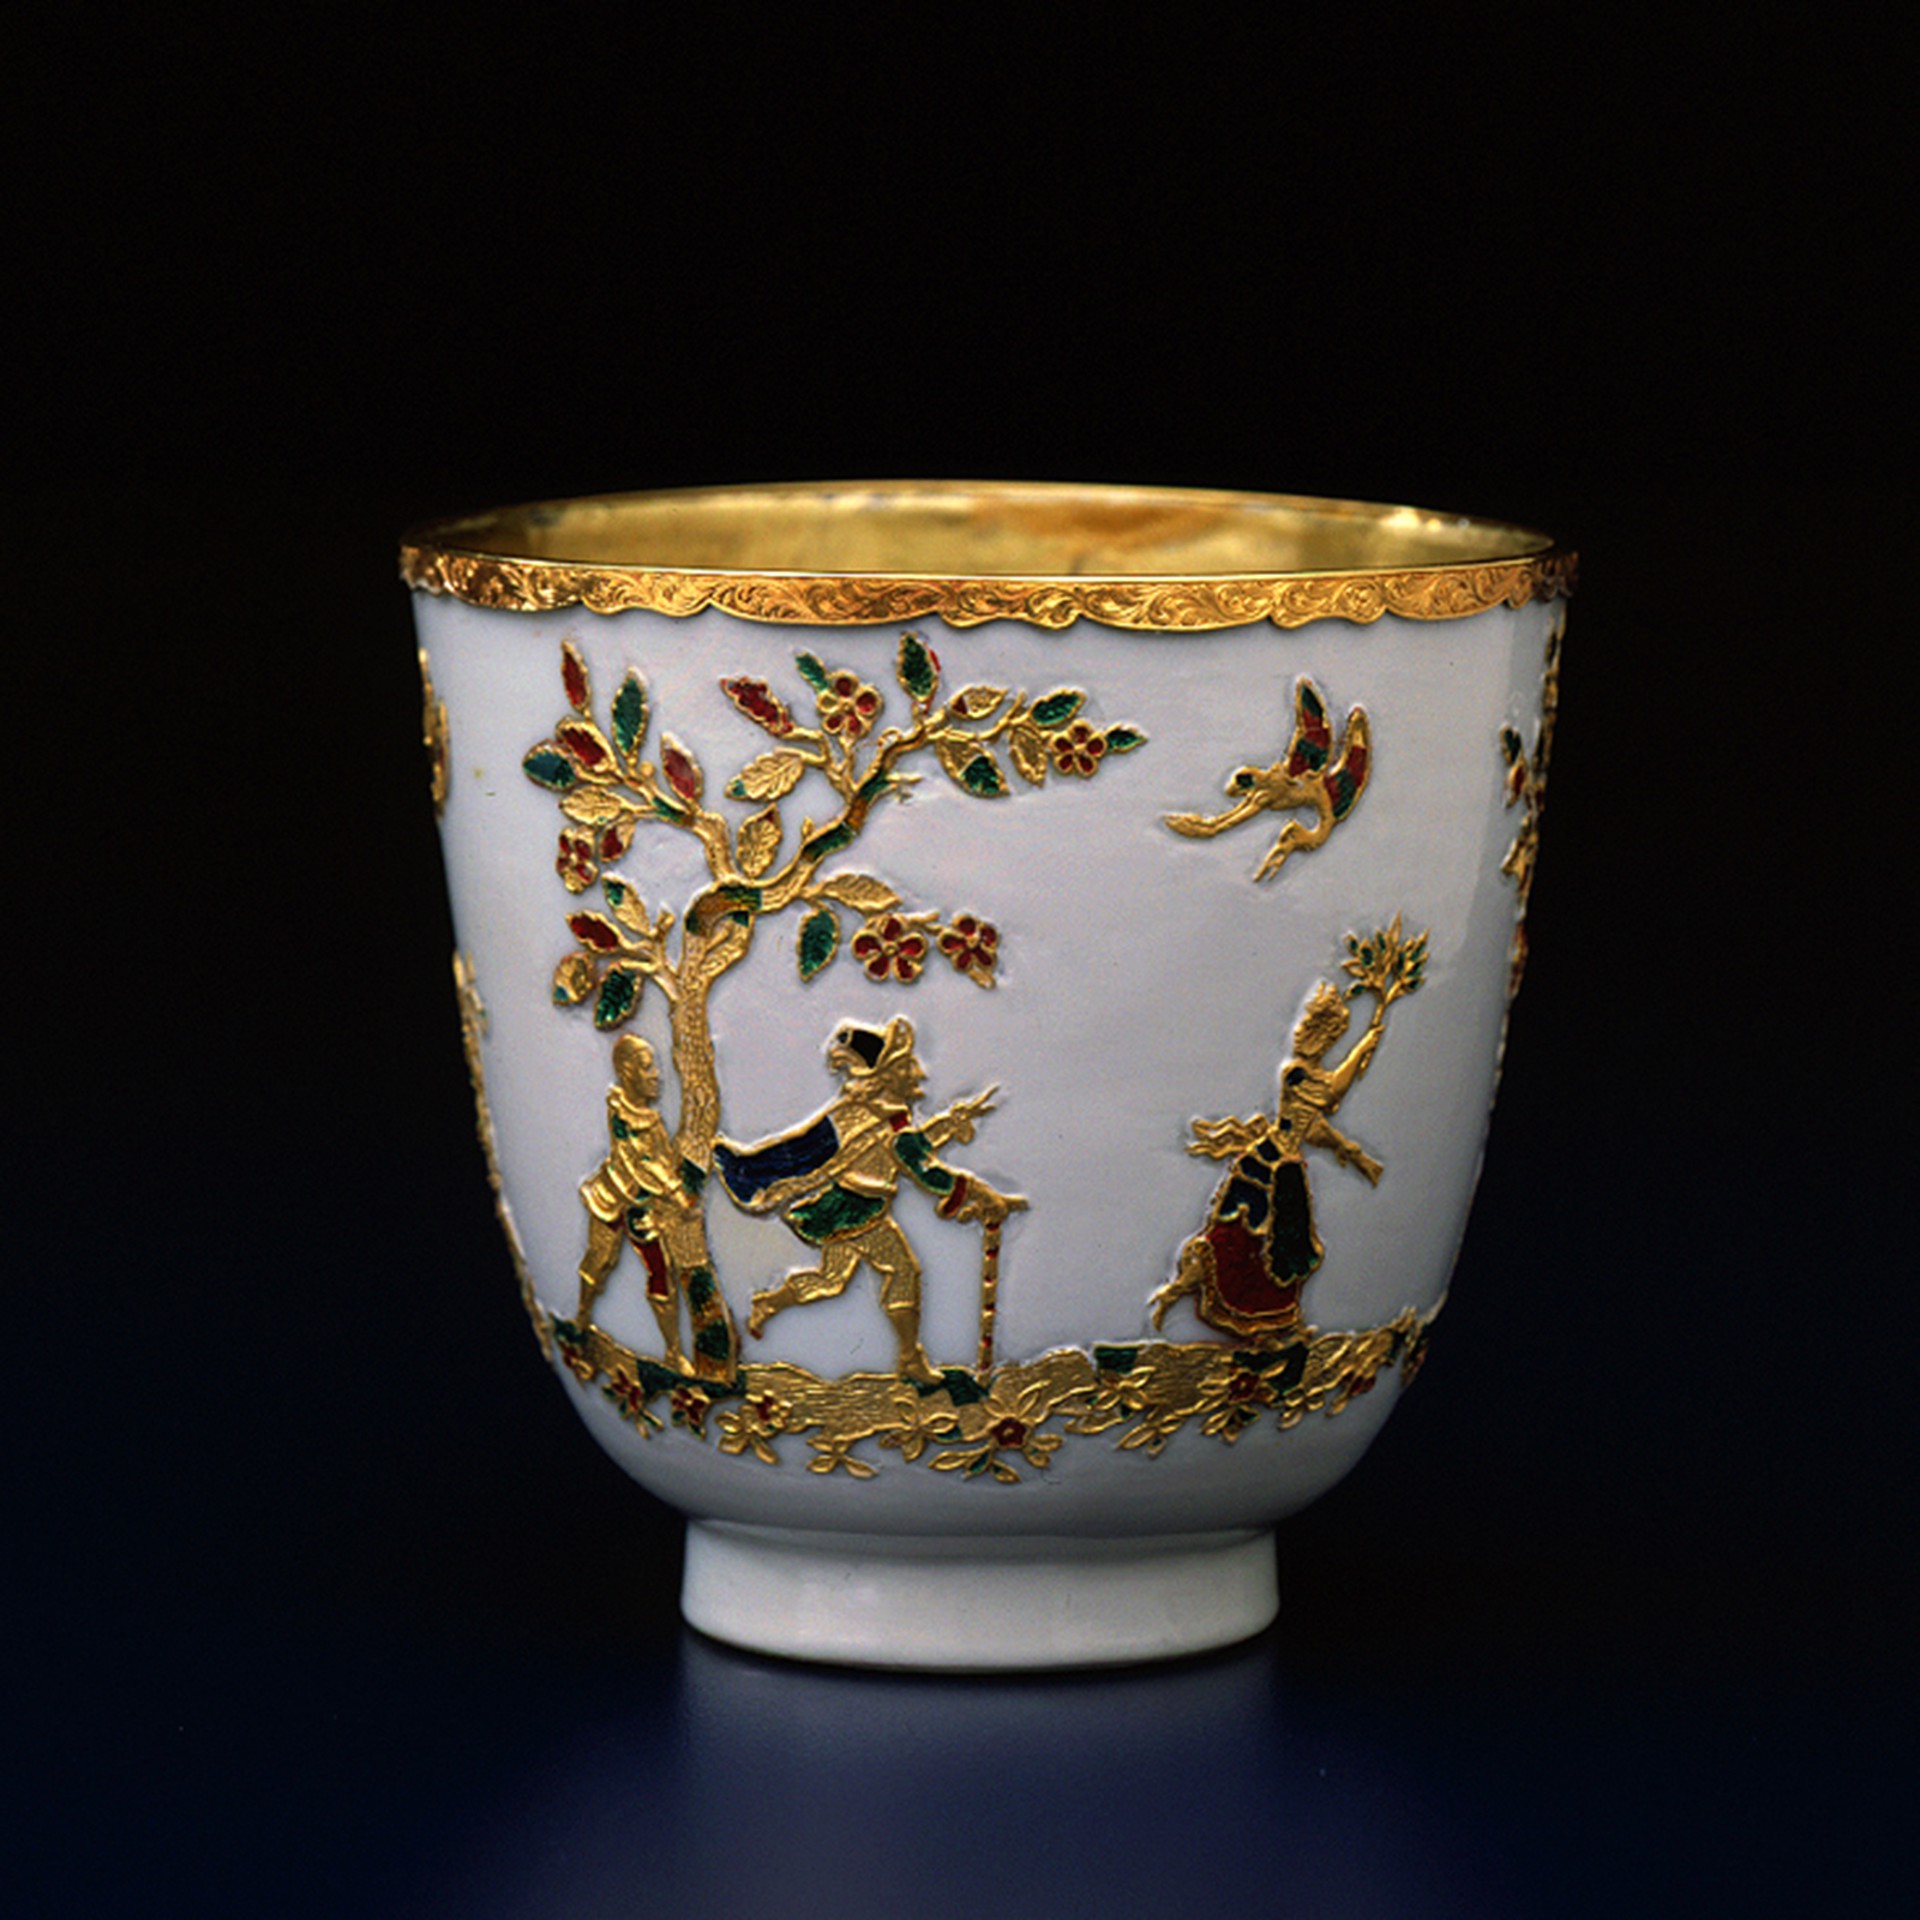 SMALL CUP WITH GOLD DECOR